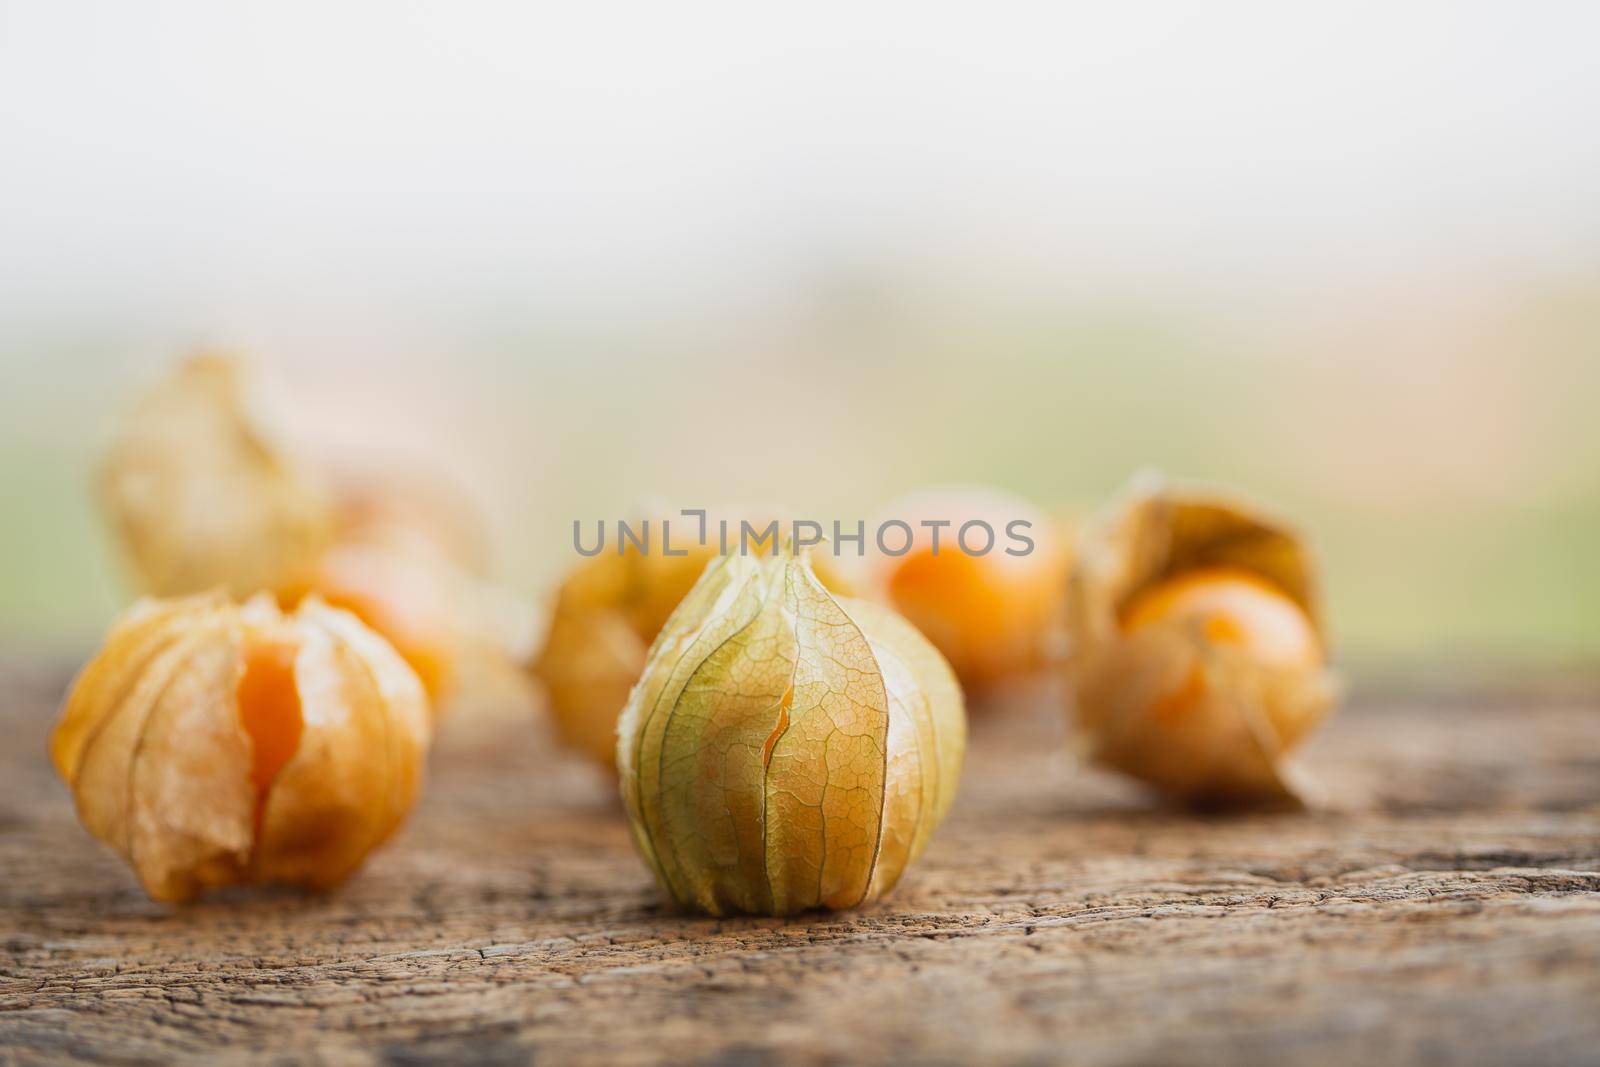 Cape Gooseberries in a group on wood